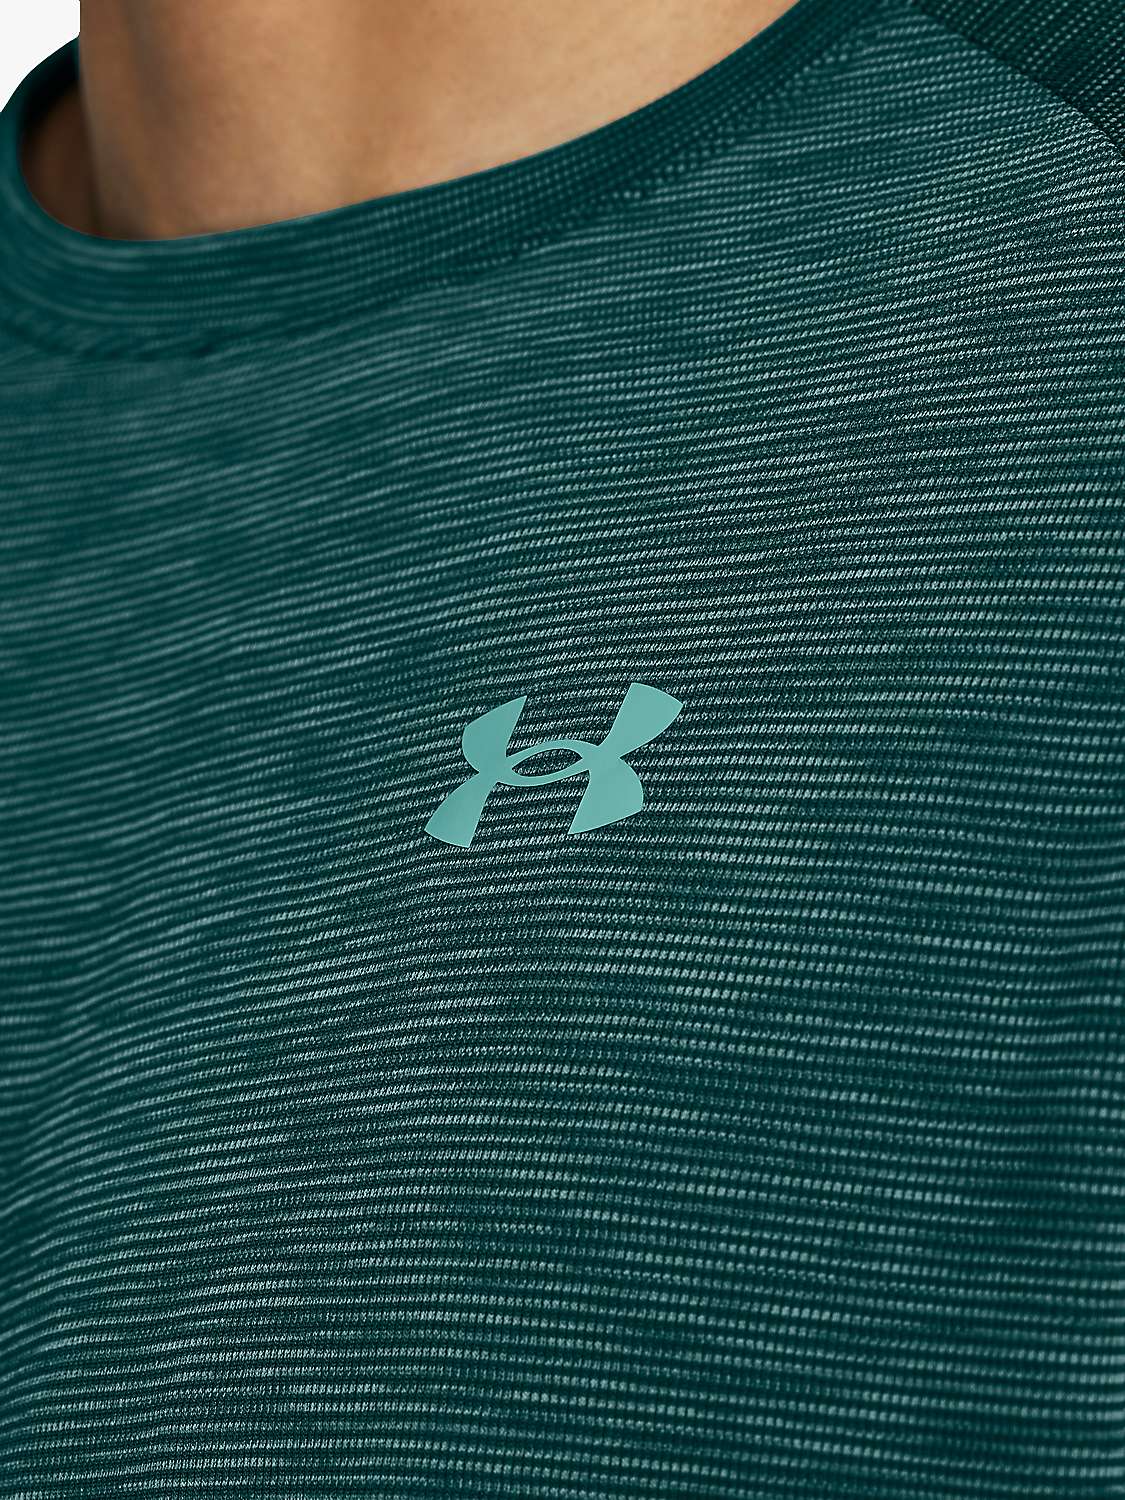 Buy Under Armour Tech Gym Top, Teal/Turquoise Online at johnlewis.com